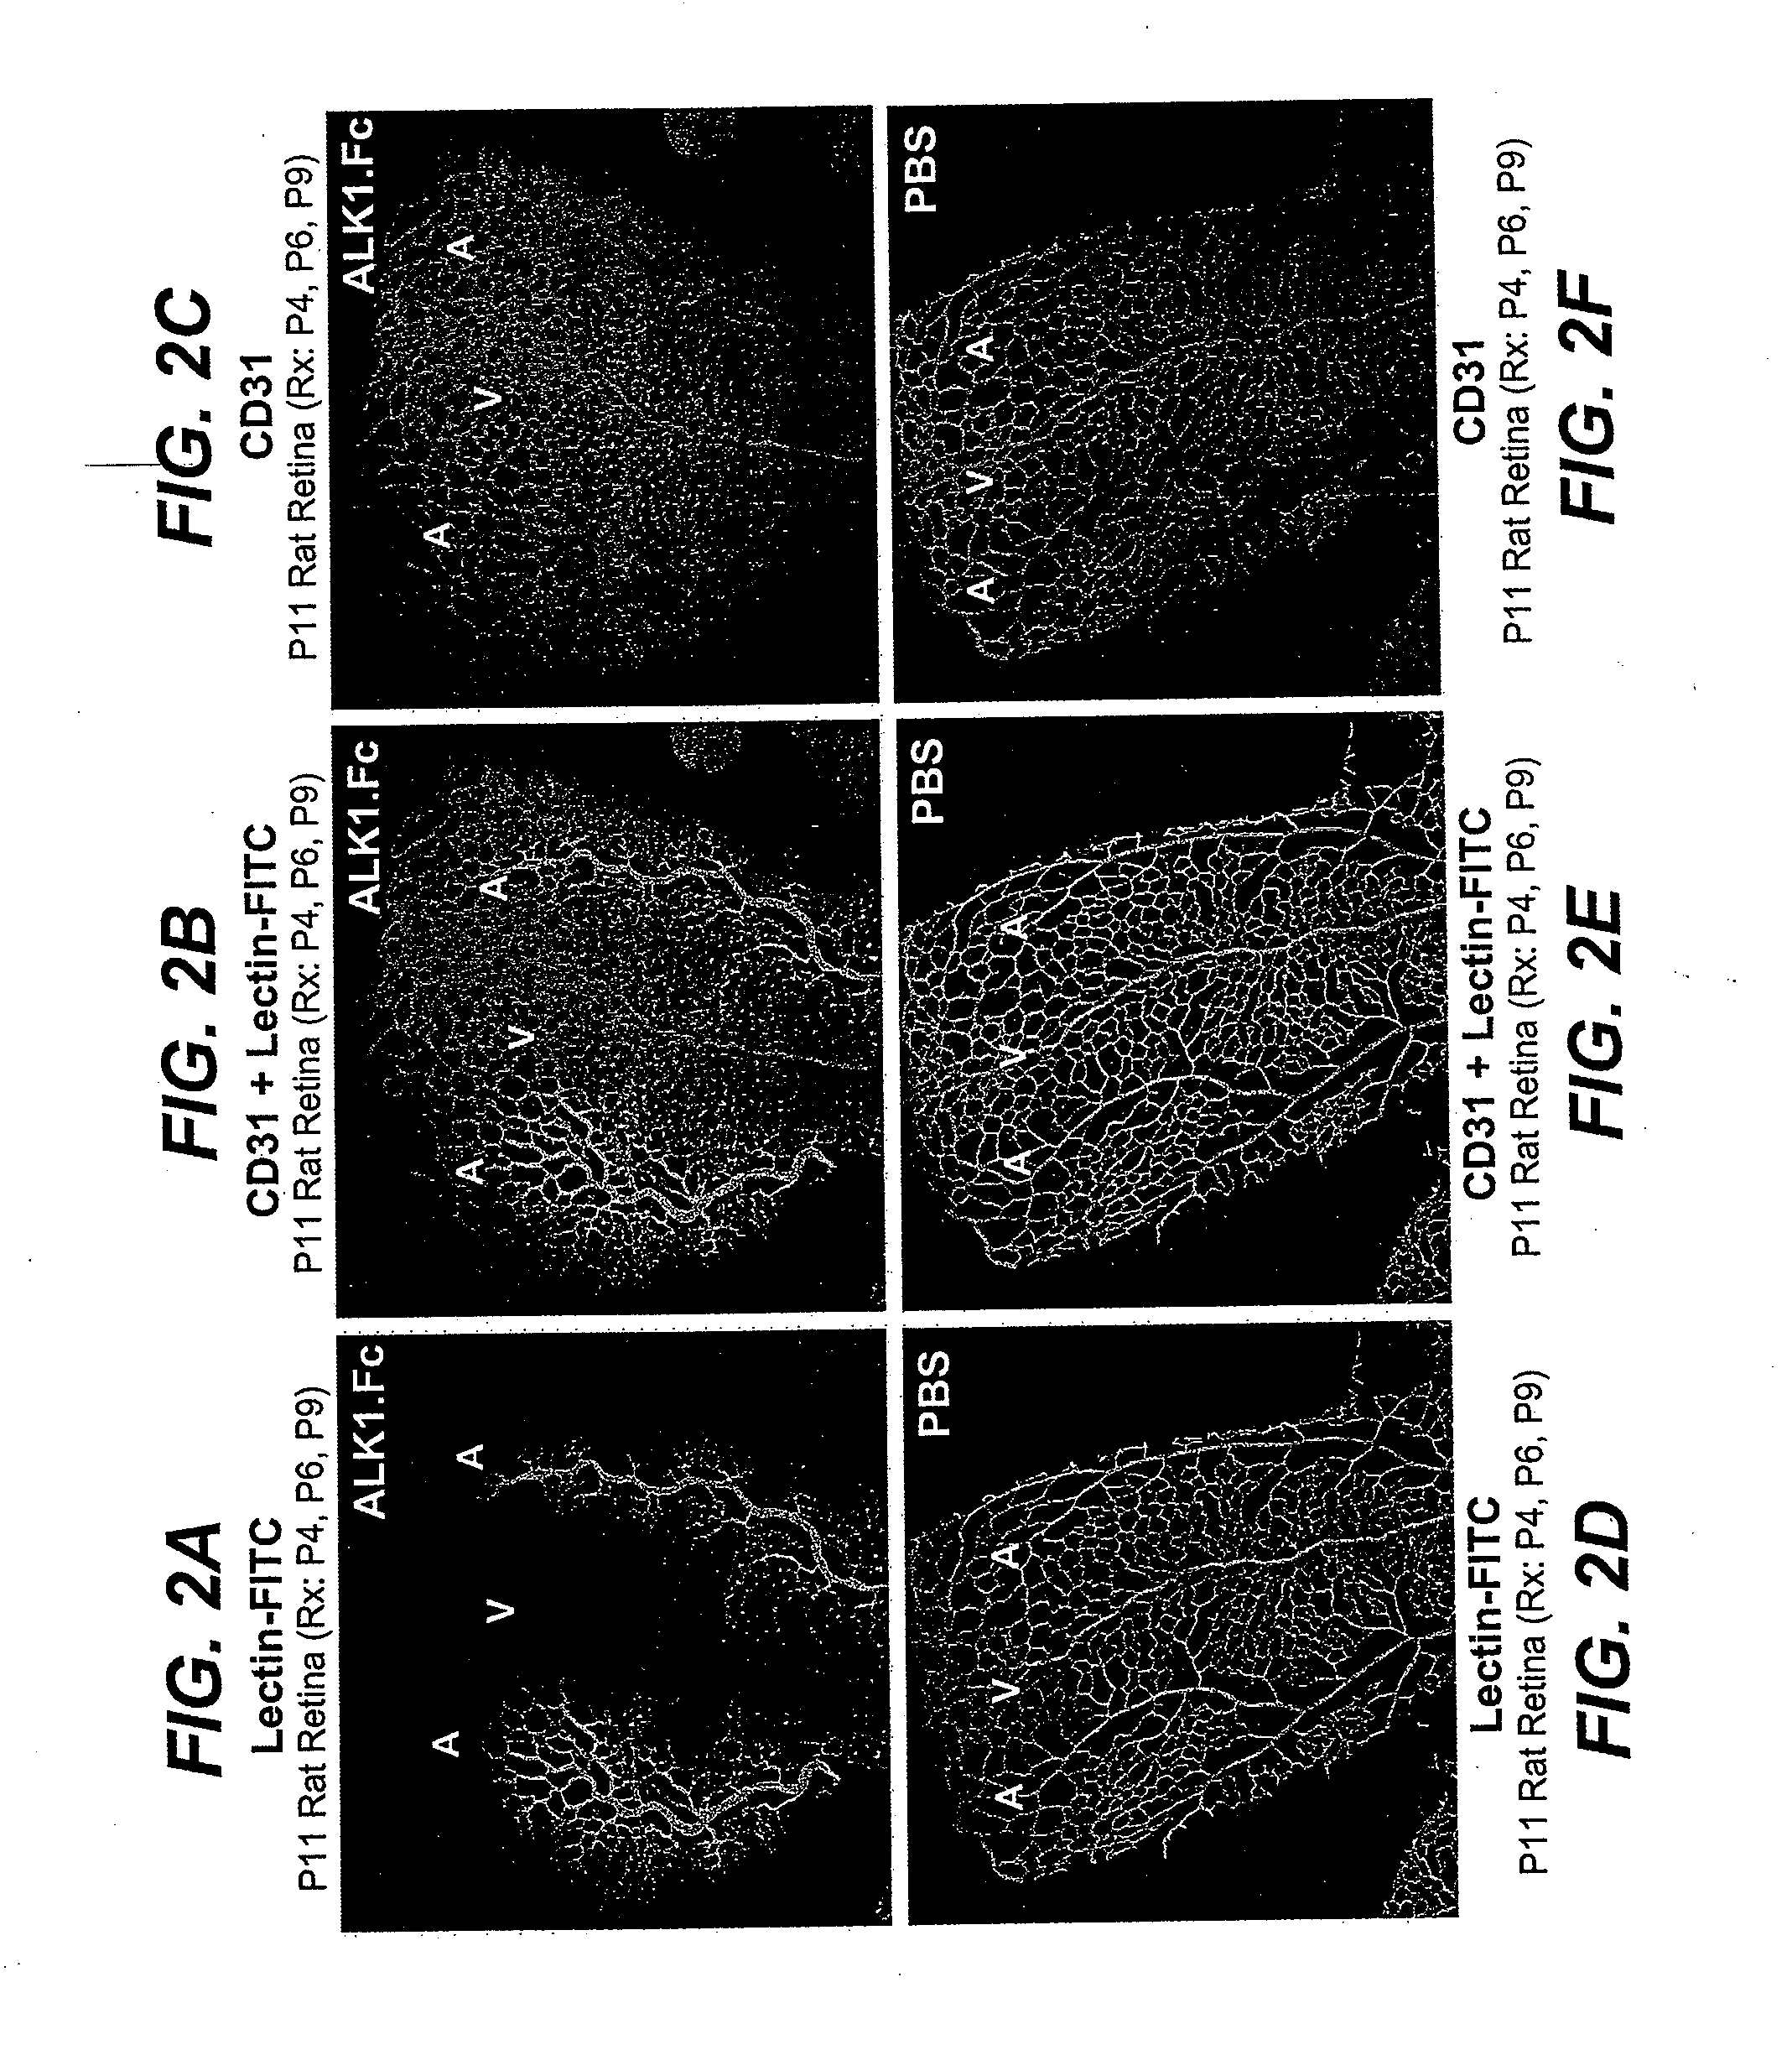 Activin receptor-like kinase-1 compositions and methods of use